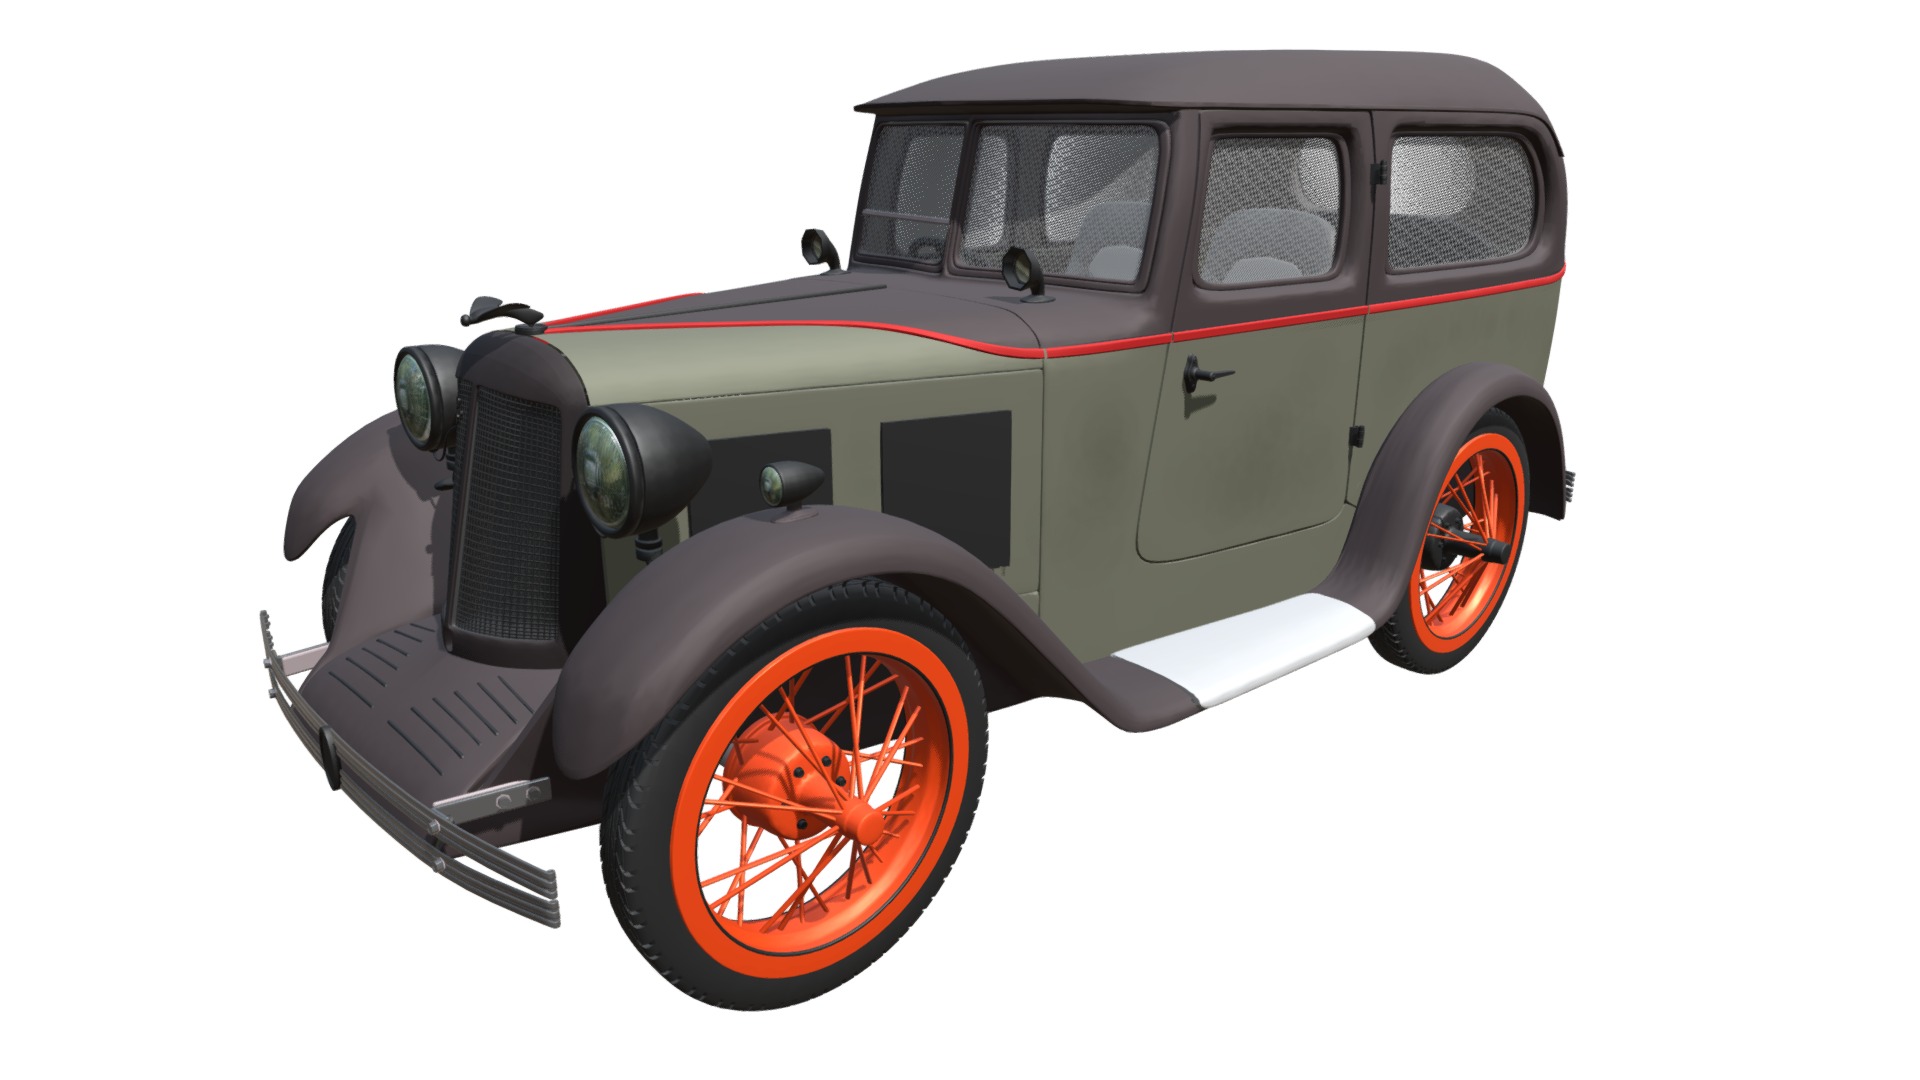 3D model Austin Seven Swallow - This is a 3D model of the Austin Seven Swallow. The 3D model is about a small car with orange wheels.